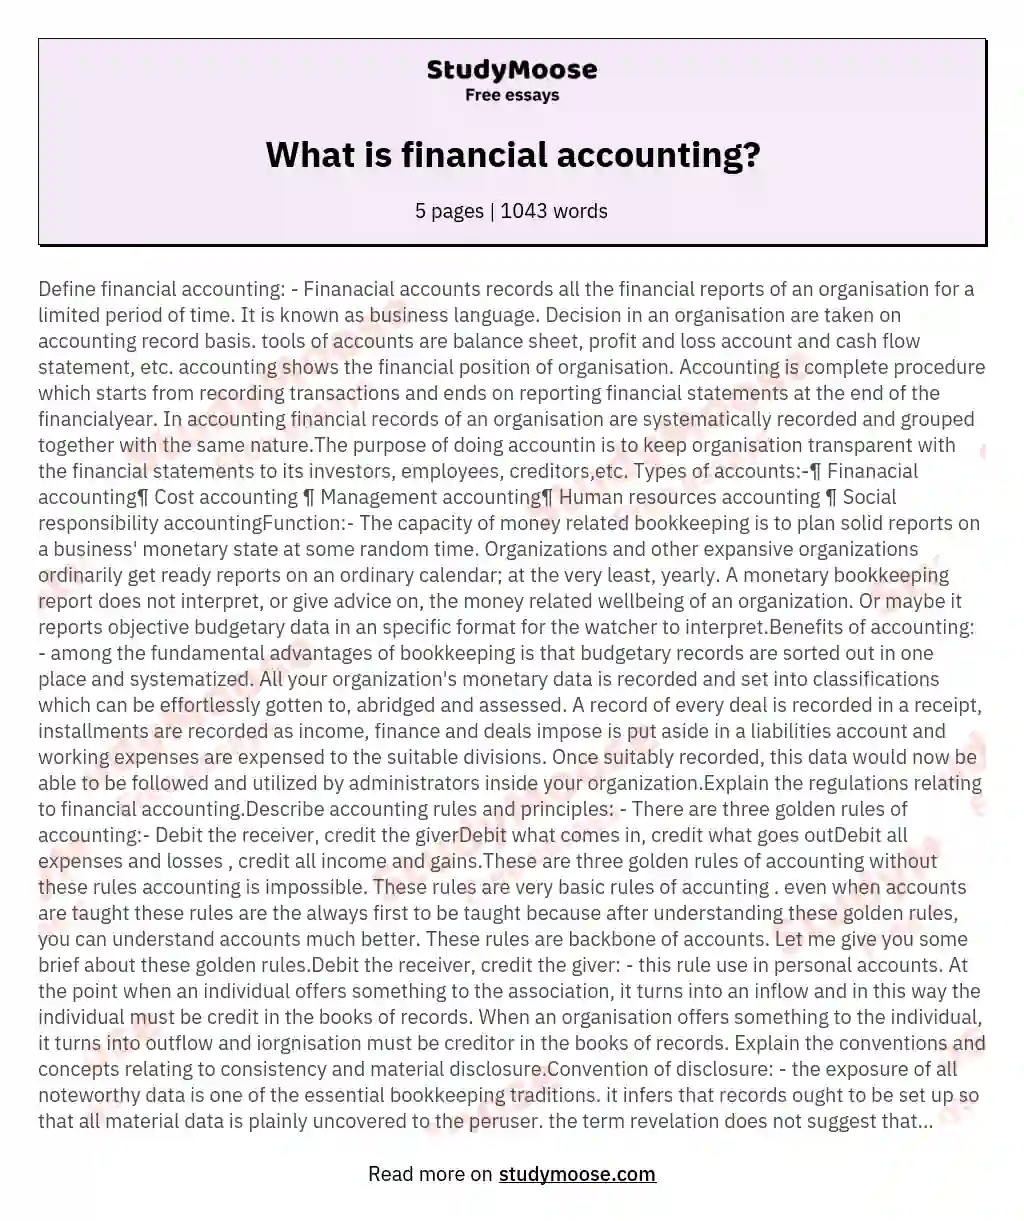 Define financial accounting Finanacial accounts records all the financial reports of